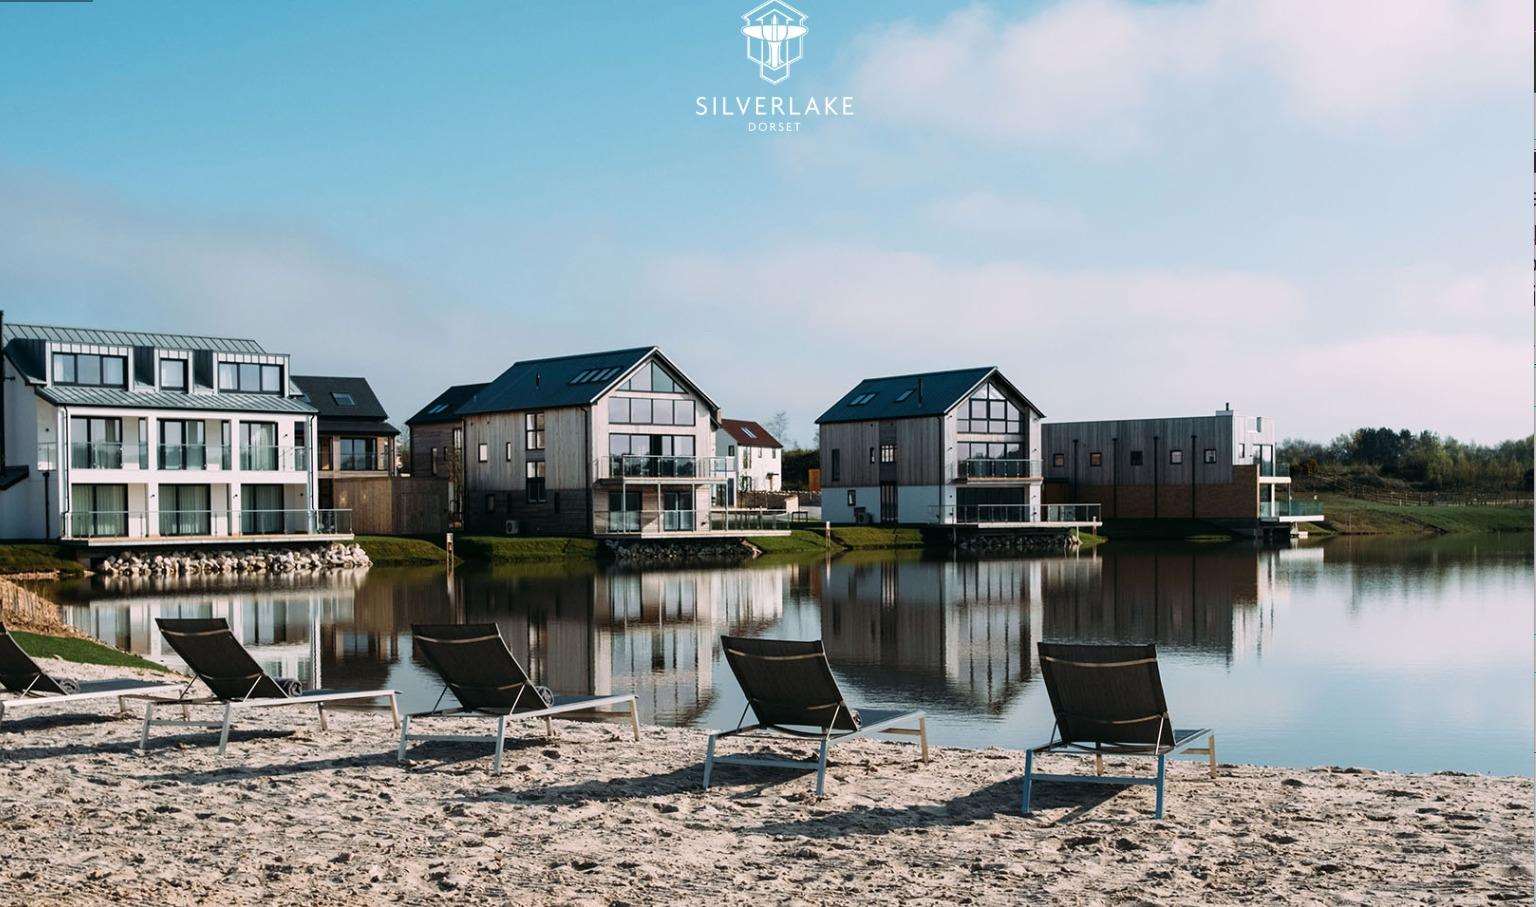 Holiday homes in Silverlake in Dorset - similar to those that could be on offer in Canterbury